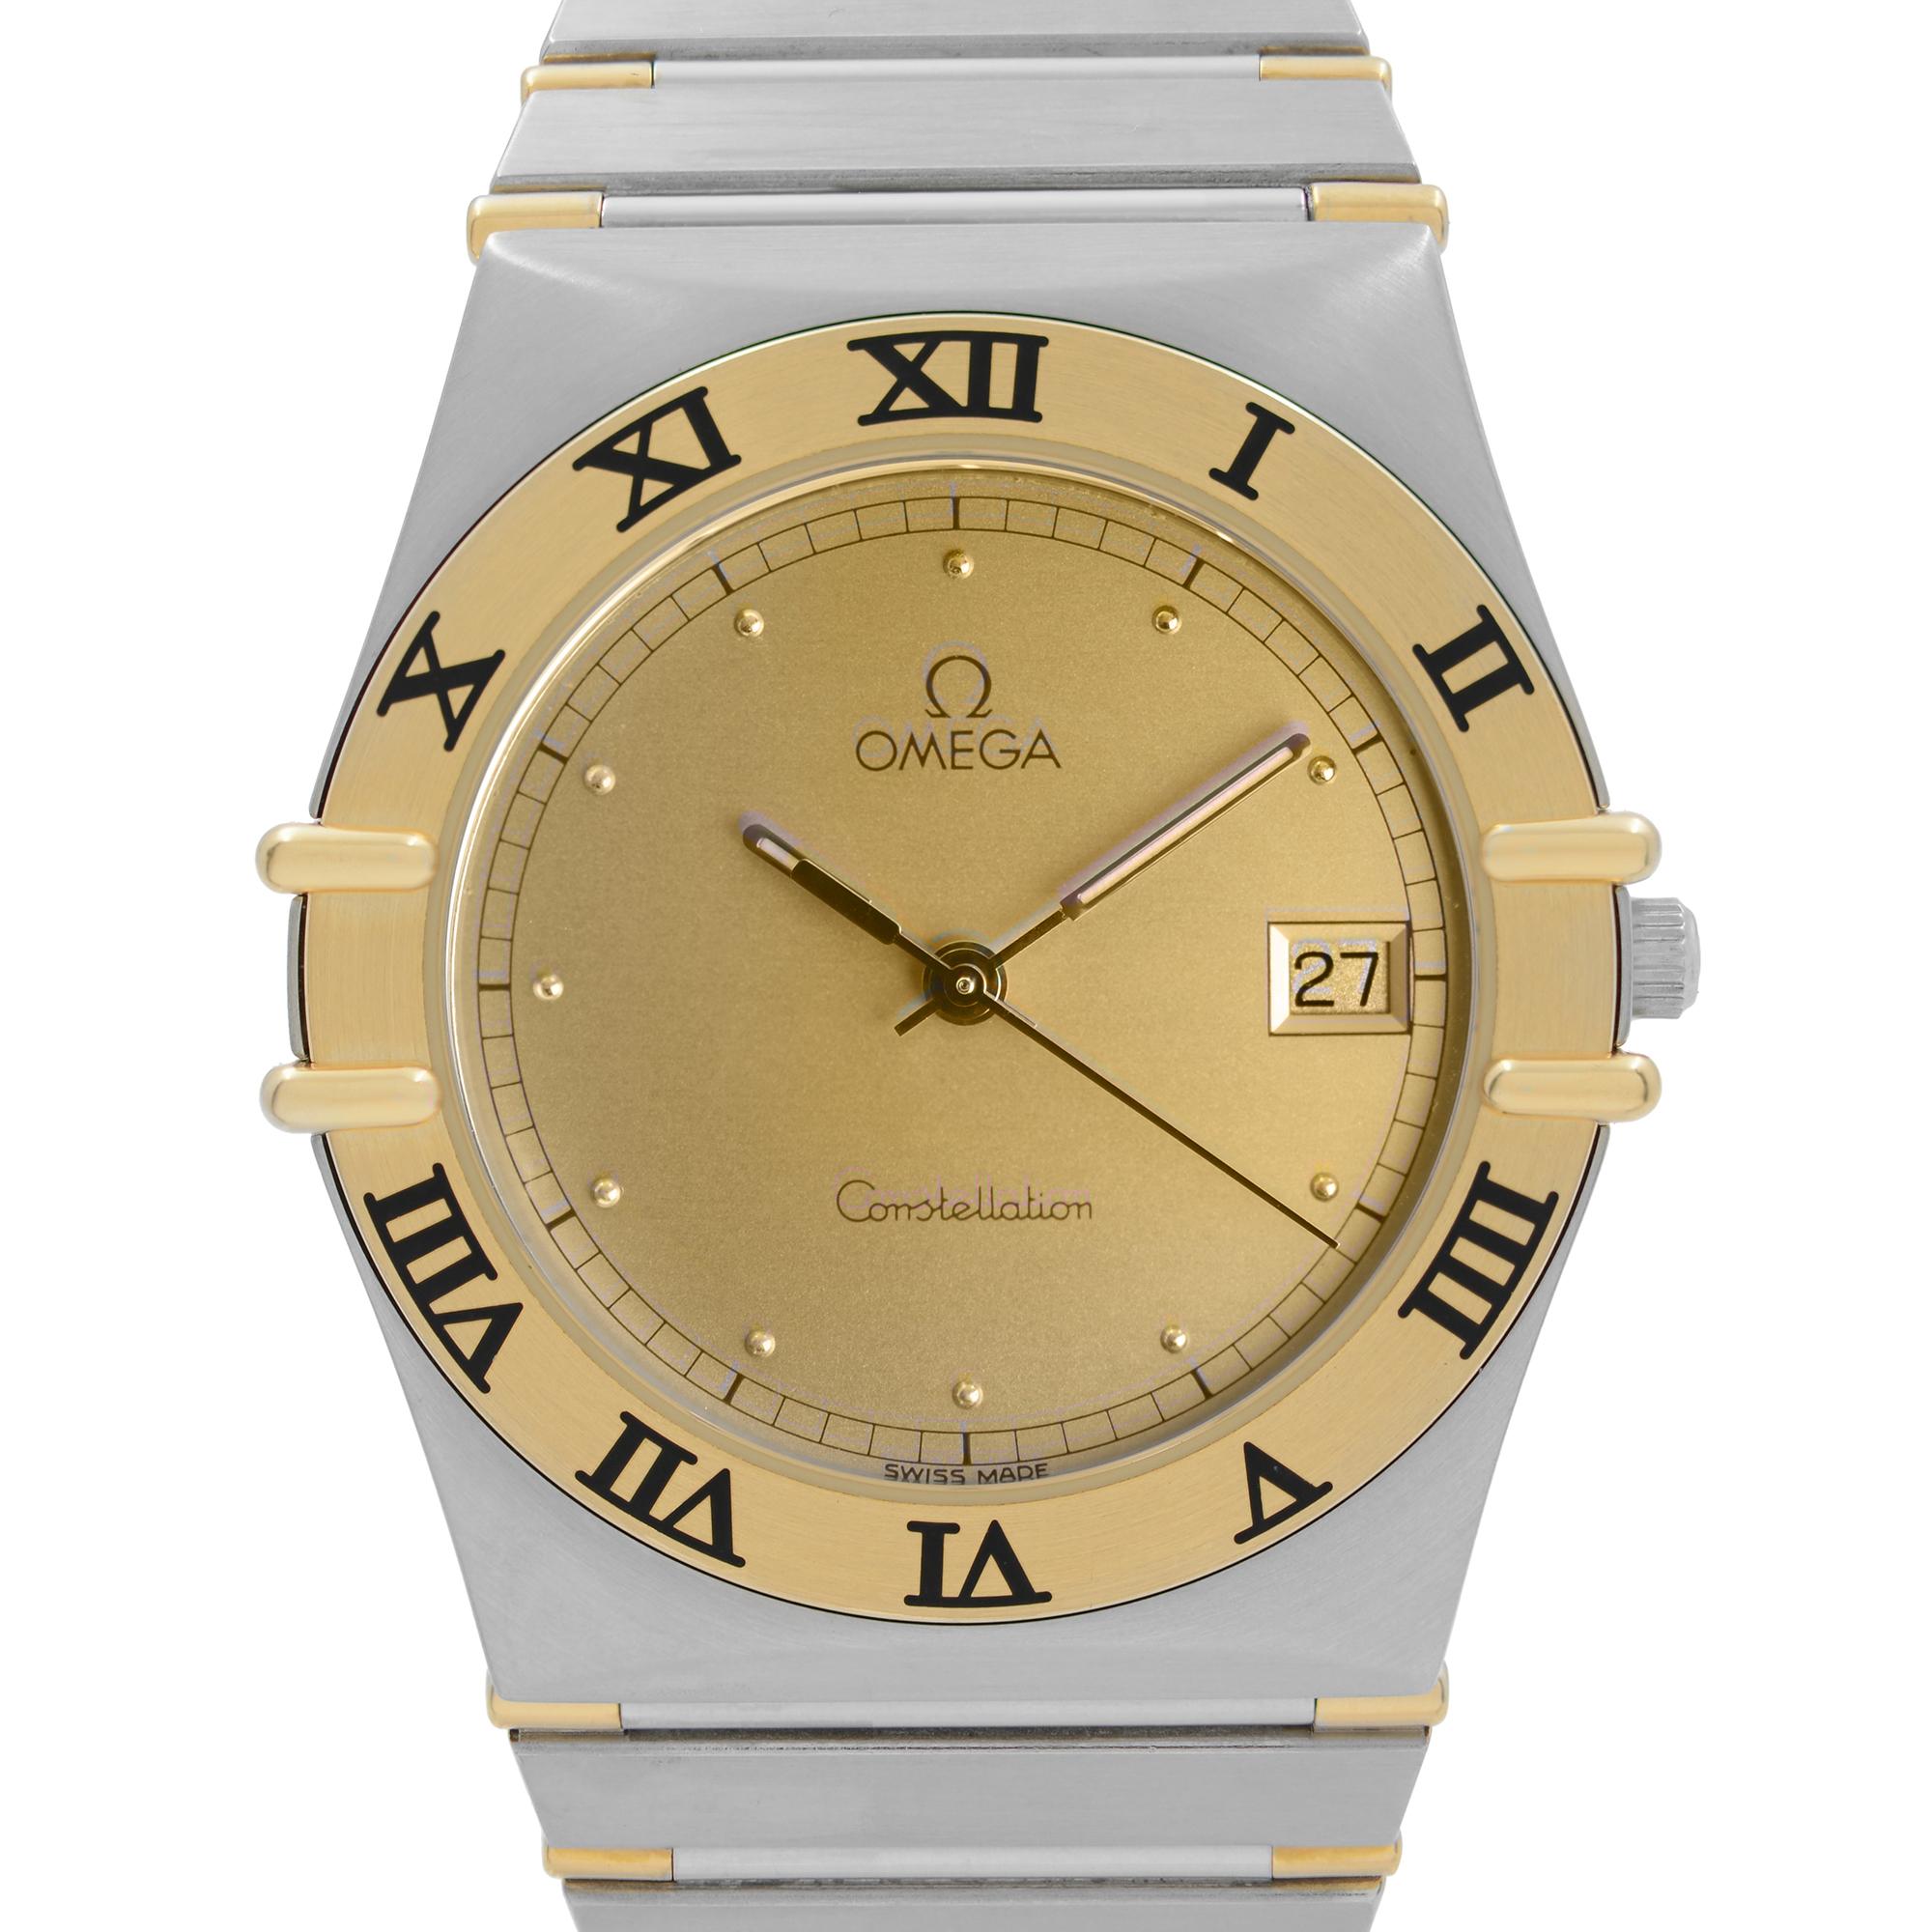 Pre-owned Omega Constellation 32mm 18K Yellow Gold Stainless Steel Men's Quartz Watch 3961070.1. The Timepiece is powered by a quartz movement. Features: Polished Stainless Steel Case and 18k Yellow Gold and Steel Bracelet. Fixed Gold Bezel. Gold